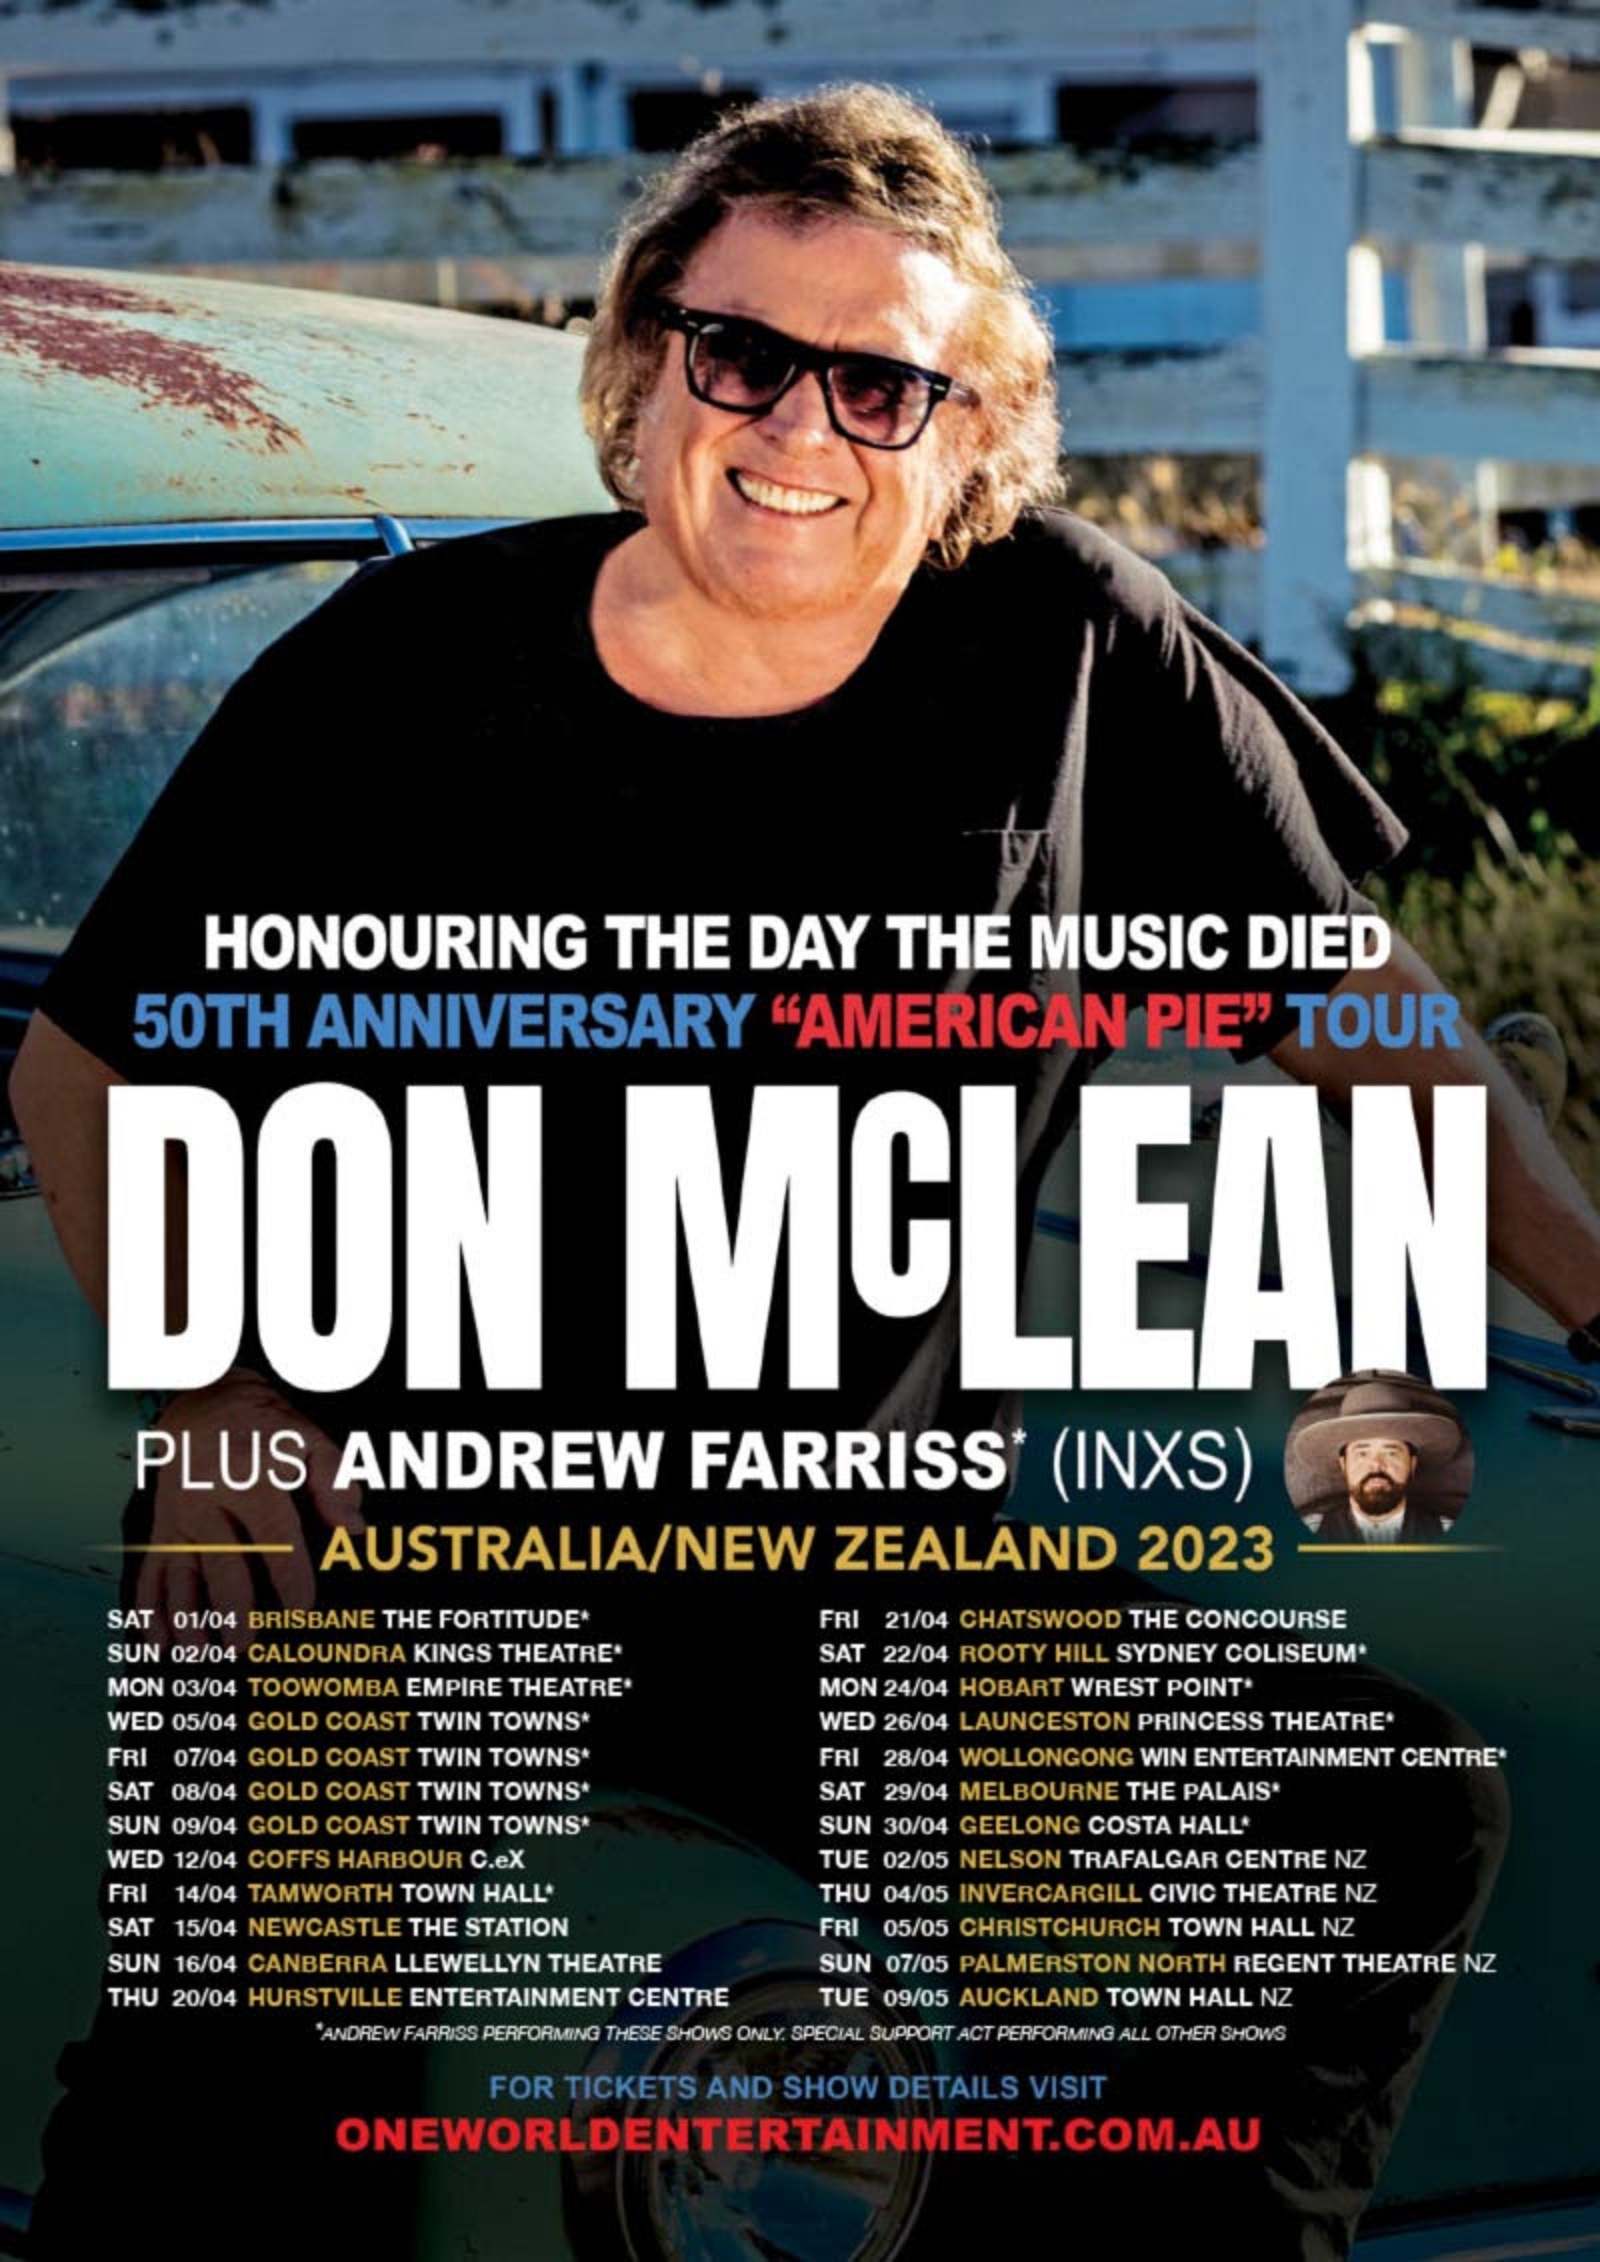 DON McLEAN ANNOUNCES THE DAY THE MUSIC DIED 50TH ANNIVERSARY OF “AMERICAN PIE” AUSTRALIA AND NEW ZEALAND 2023 TOUR